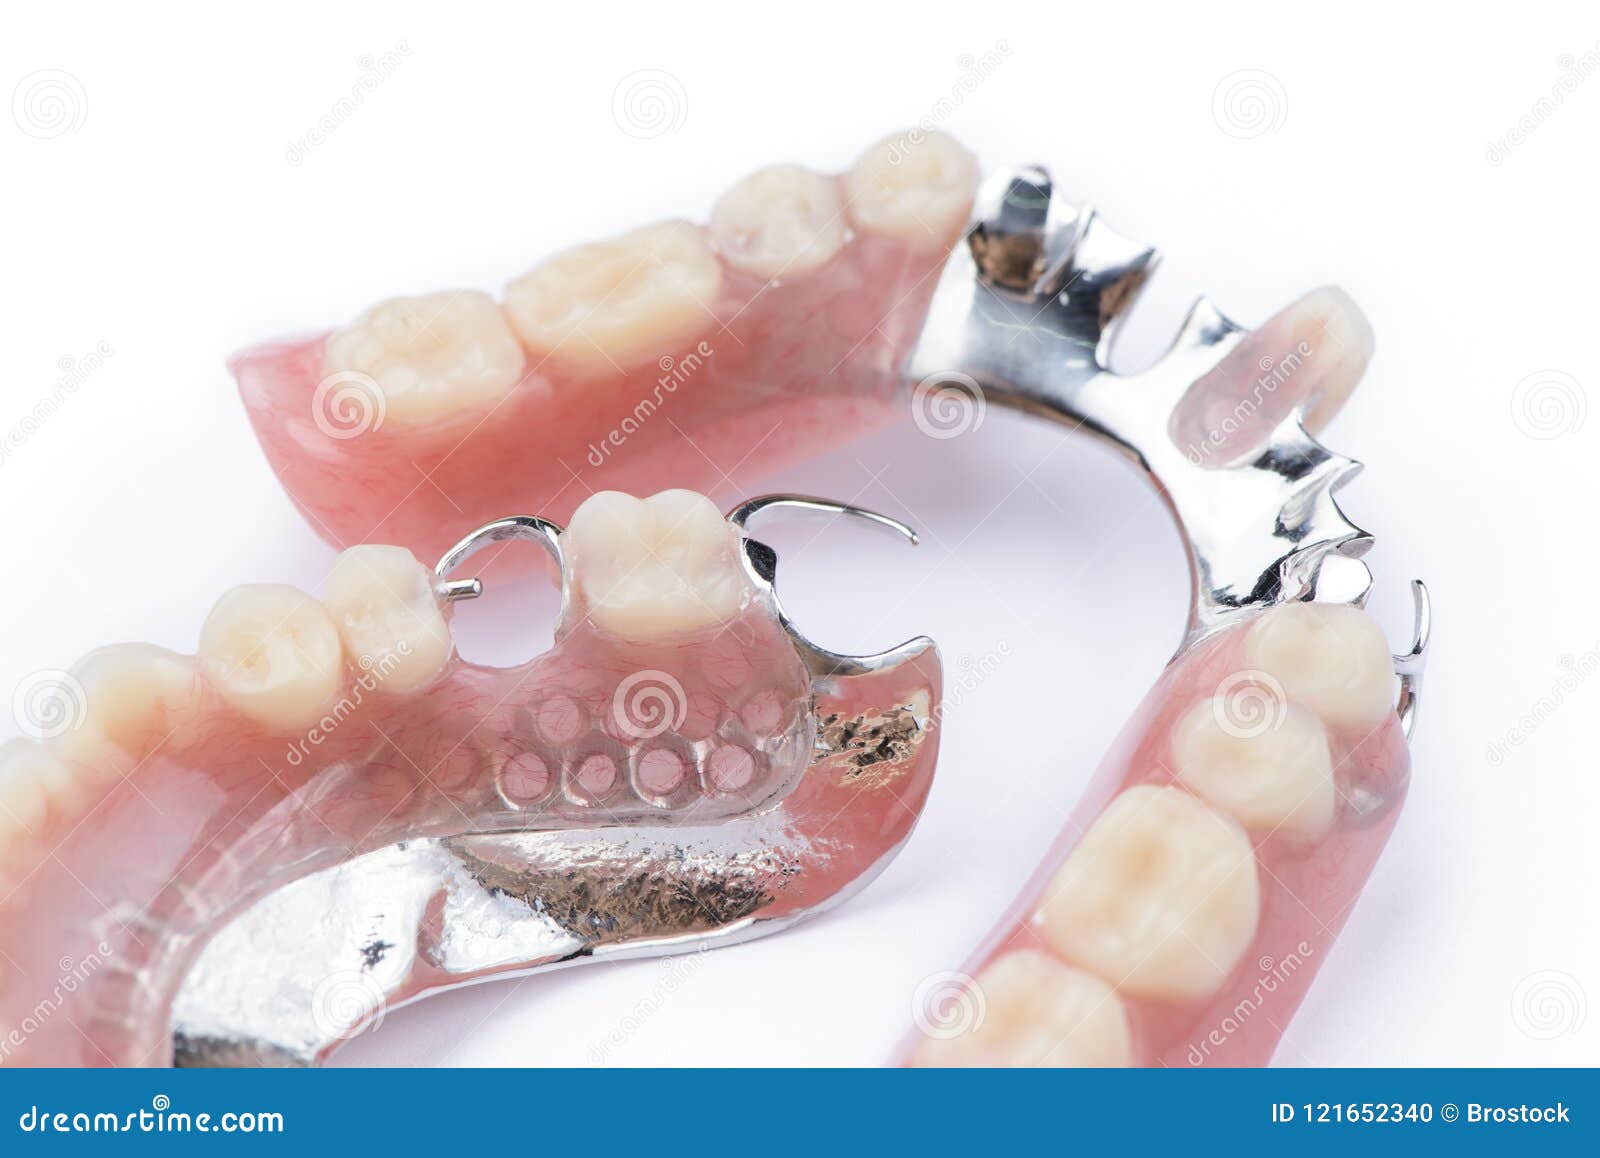 partial denture upper side on a white background